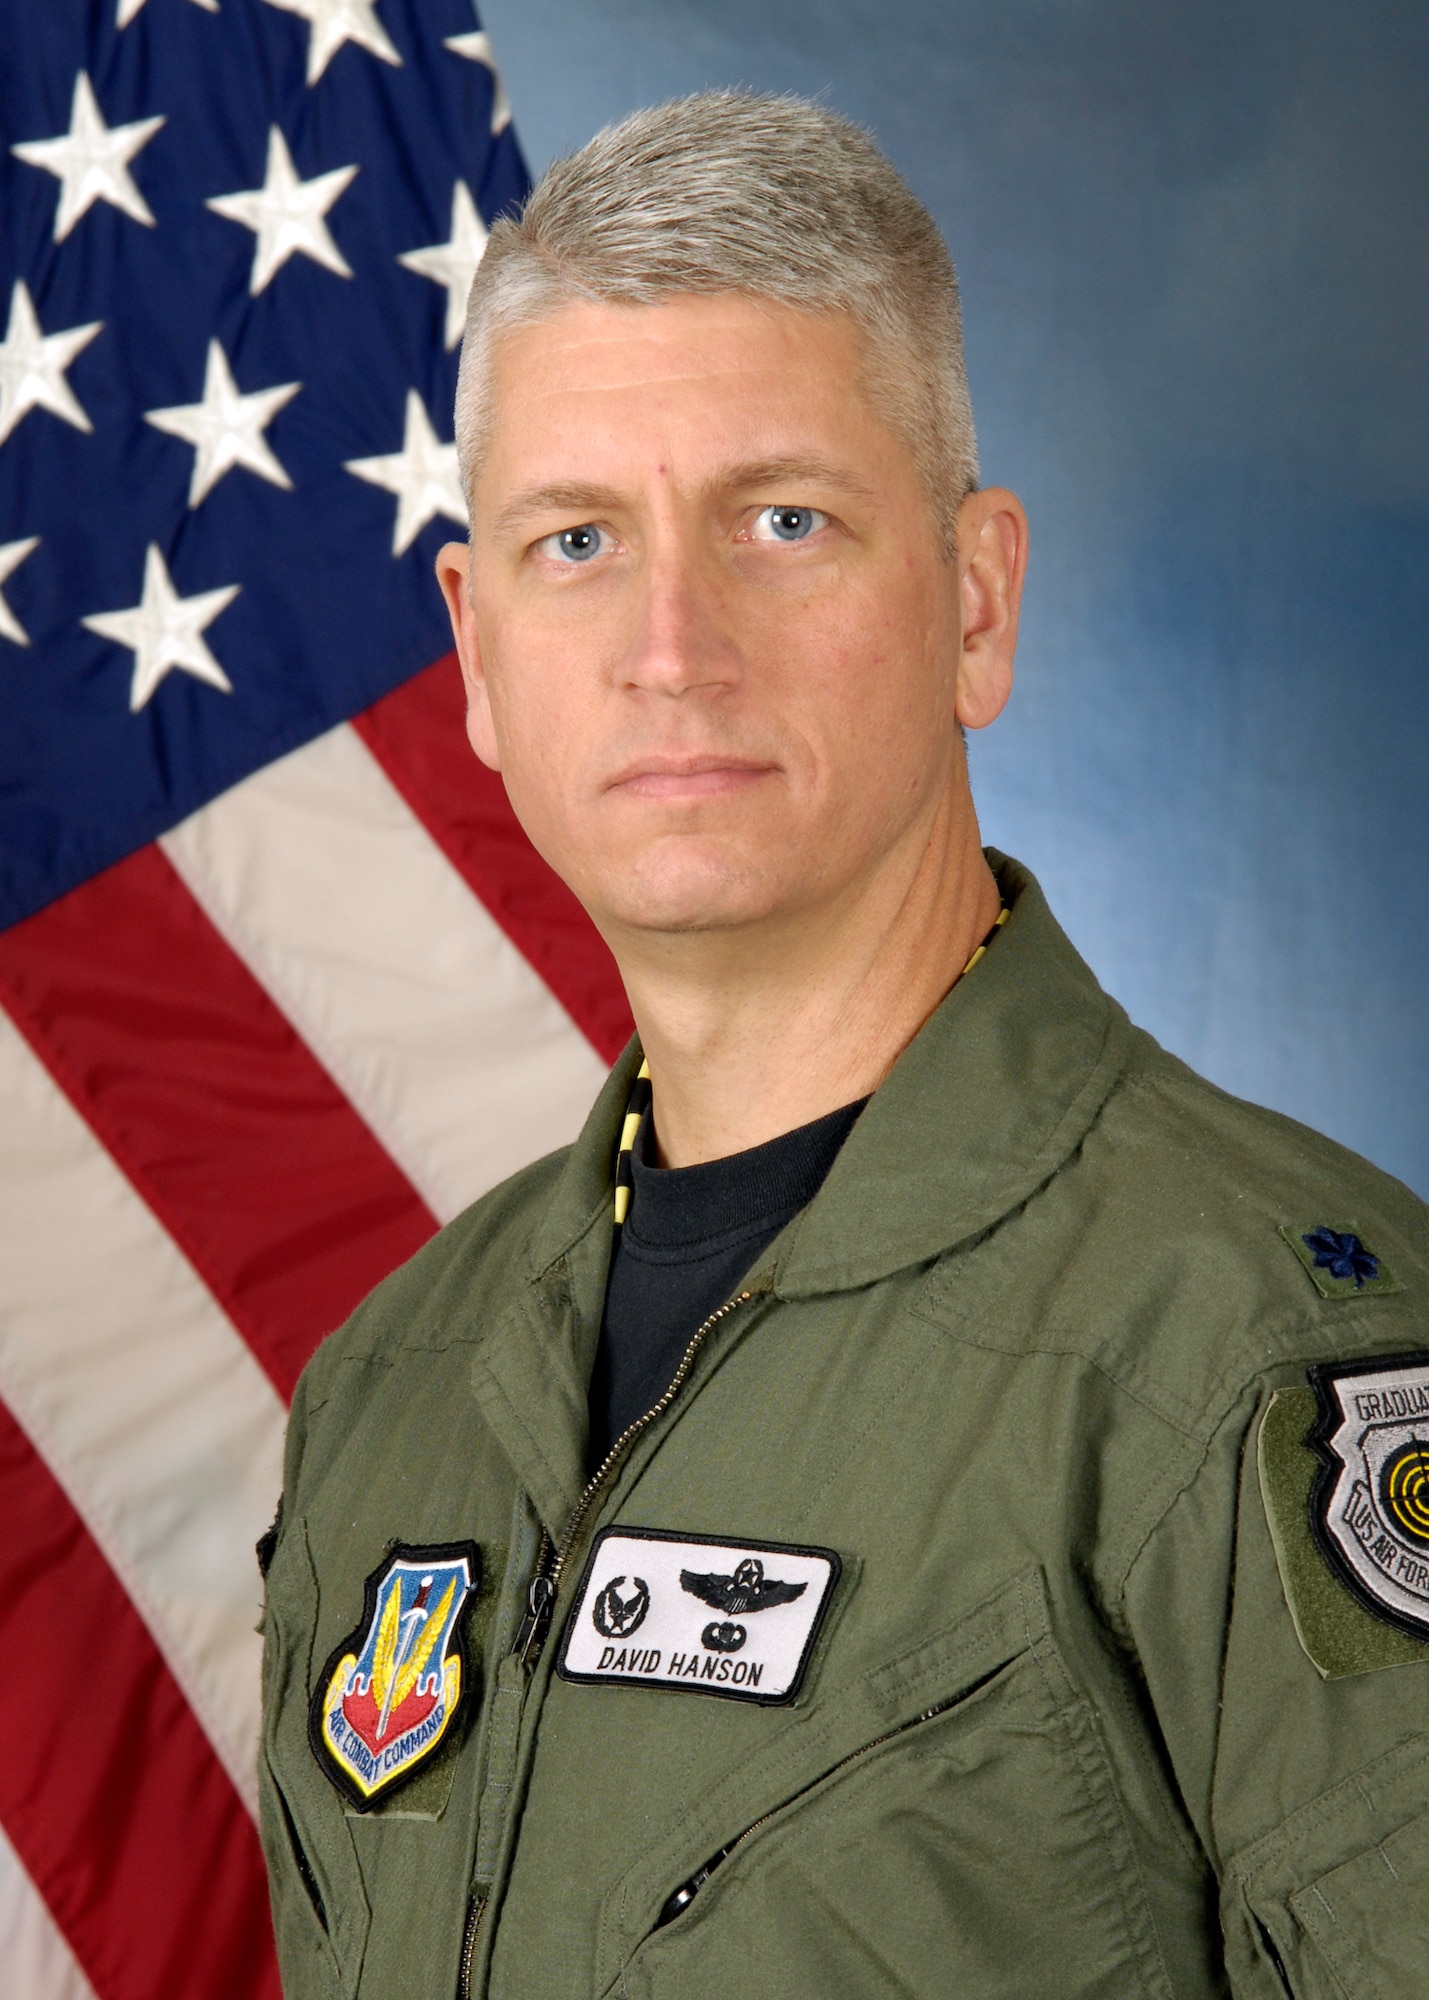 Lt. Col. David Hanson, 14th Weapons Squadron operations officer, poses for this photo at the 1st Special Operations Wing Public Affairs photo lab at Hurlburt Field, Fla., Jan. 11, 2011. Colonel Hanson will assume command of the 14th WPS Jan. 14, 2011. (DoD photo by U.S. Air Force Airman 1st Class Caitlin O'Neil-McKeown / RELEASED)